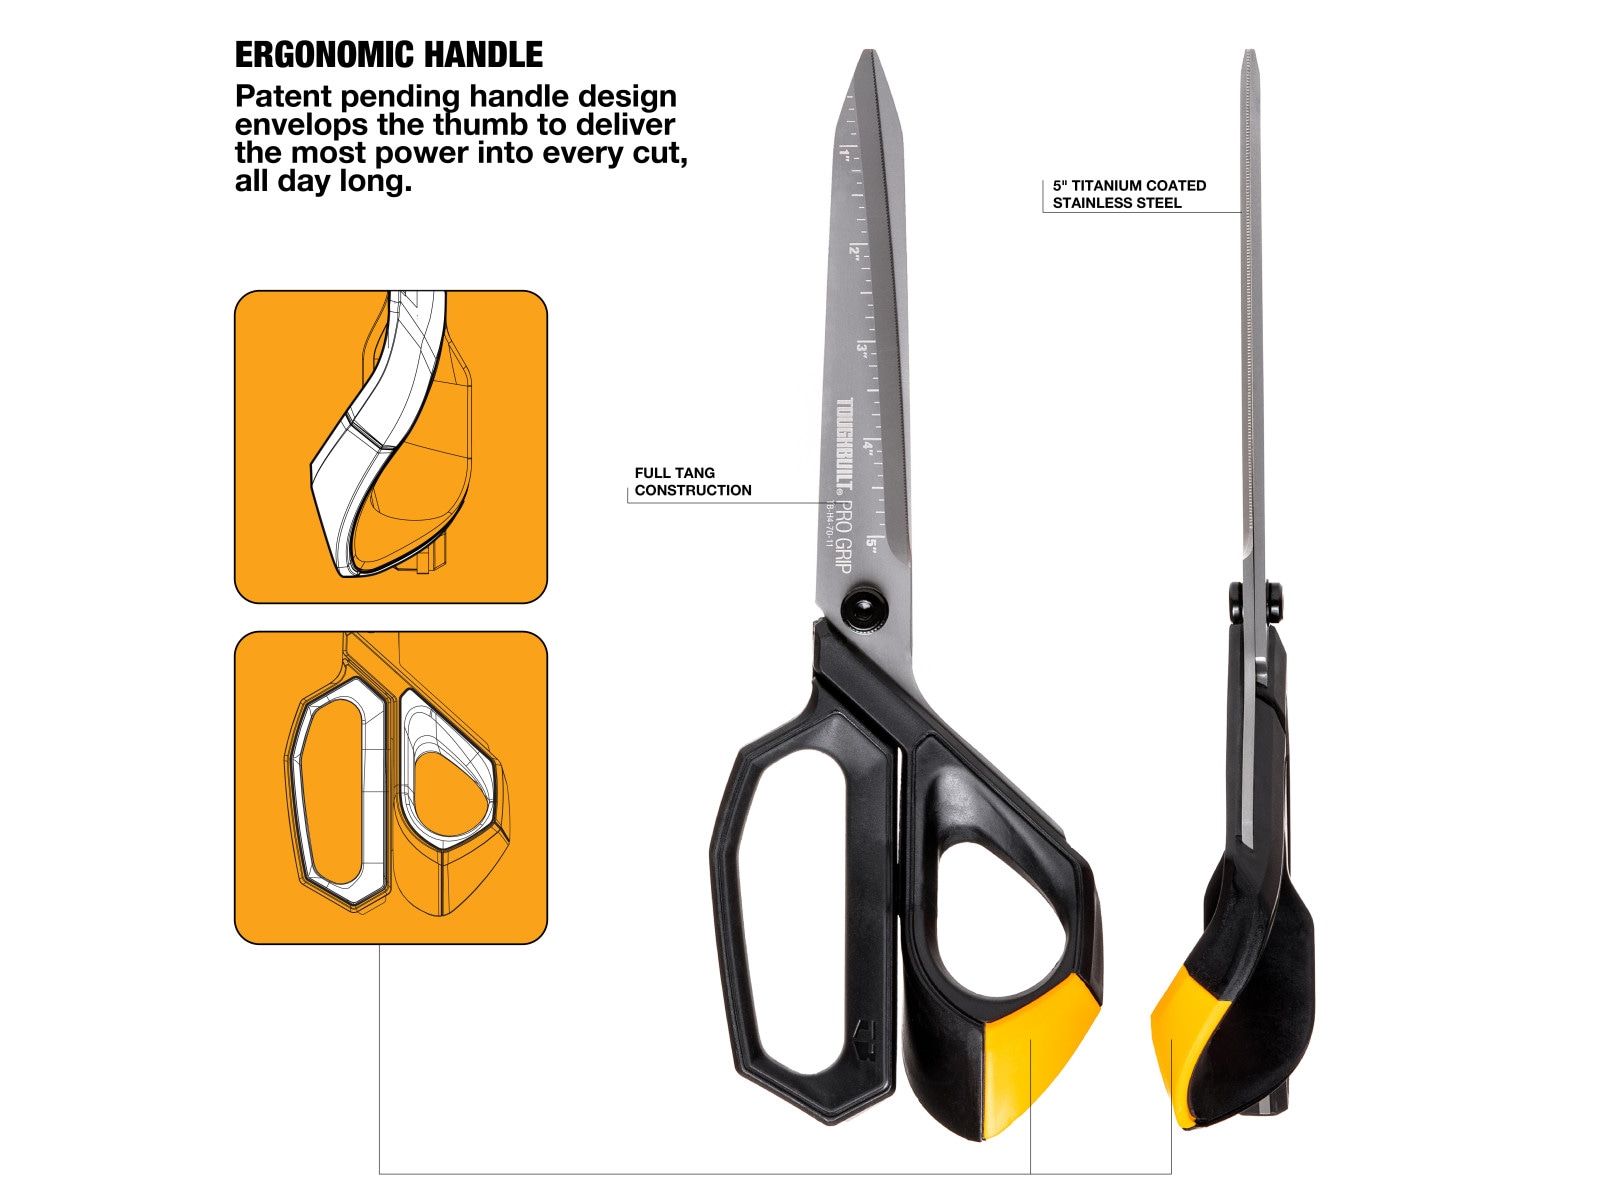 Heavy Duty Big Aluminum Plated Gray Scissors With Sharp Blades For Office :  Target